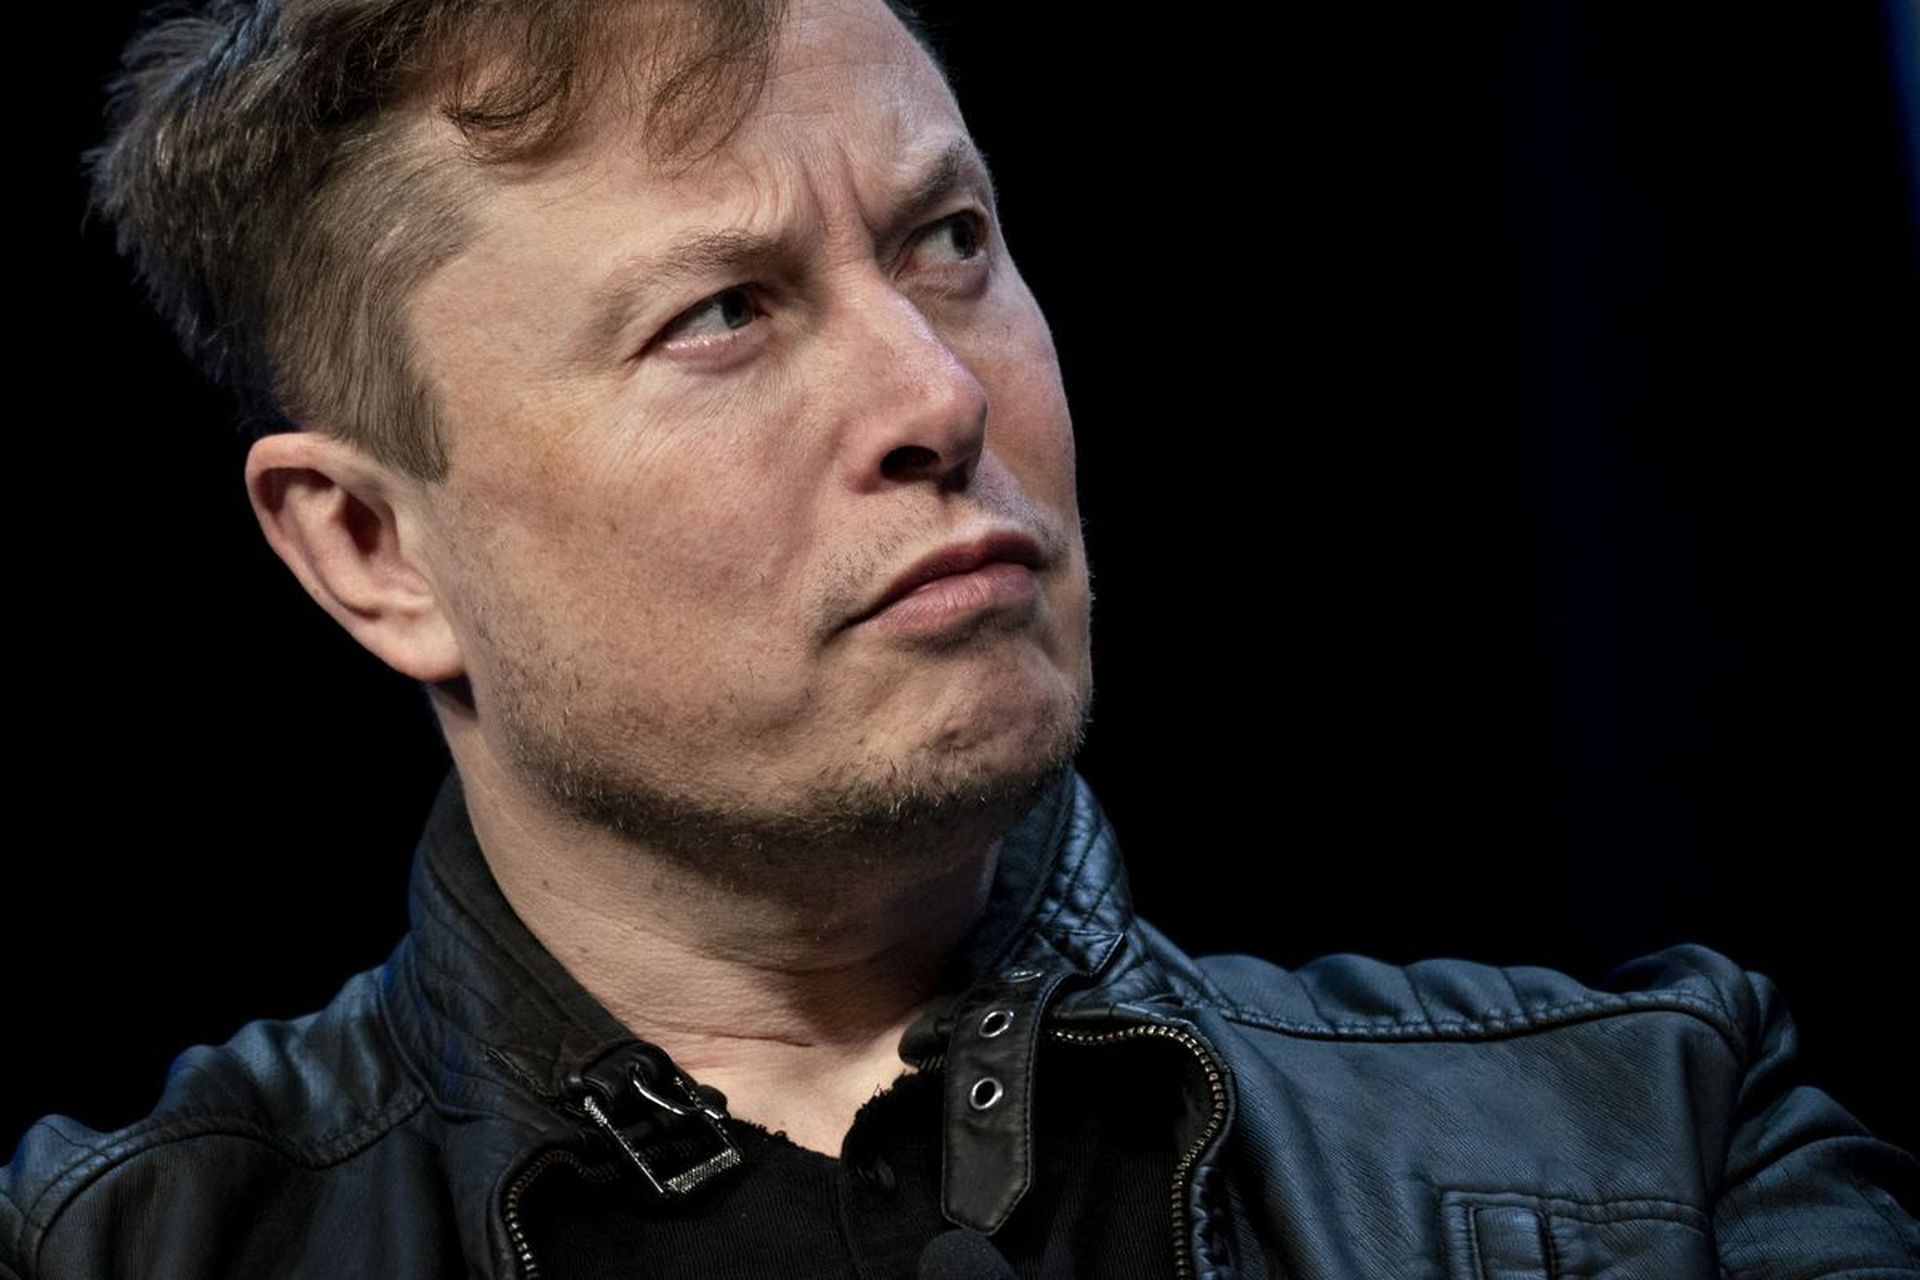 Controversy continues a day after Twitter developed a new policy to justify its decision to remove @elonjet which follows Elon Musk's private jet. Mastodon,...